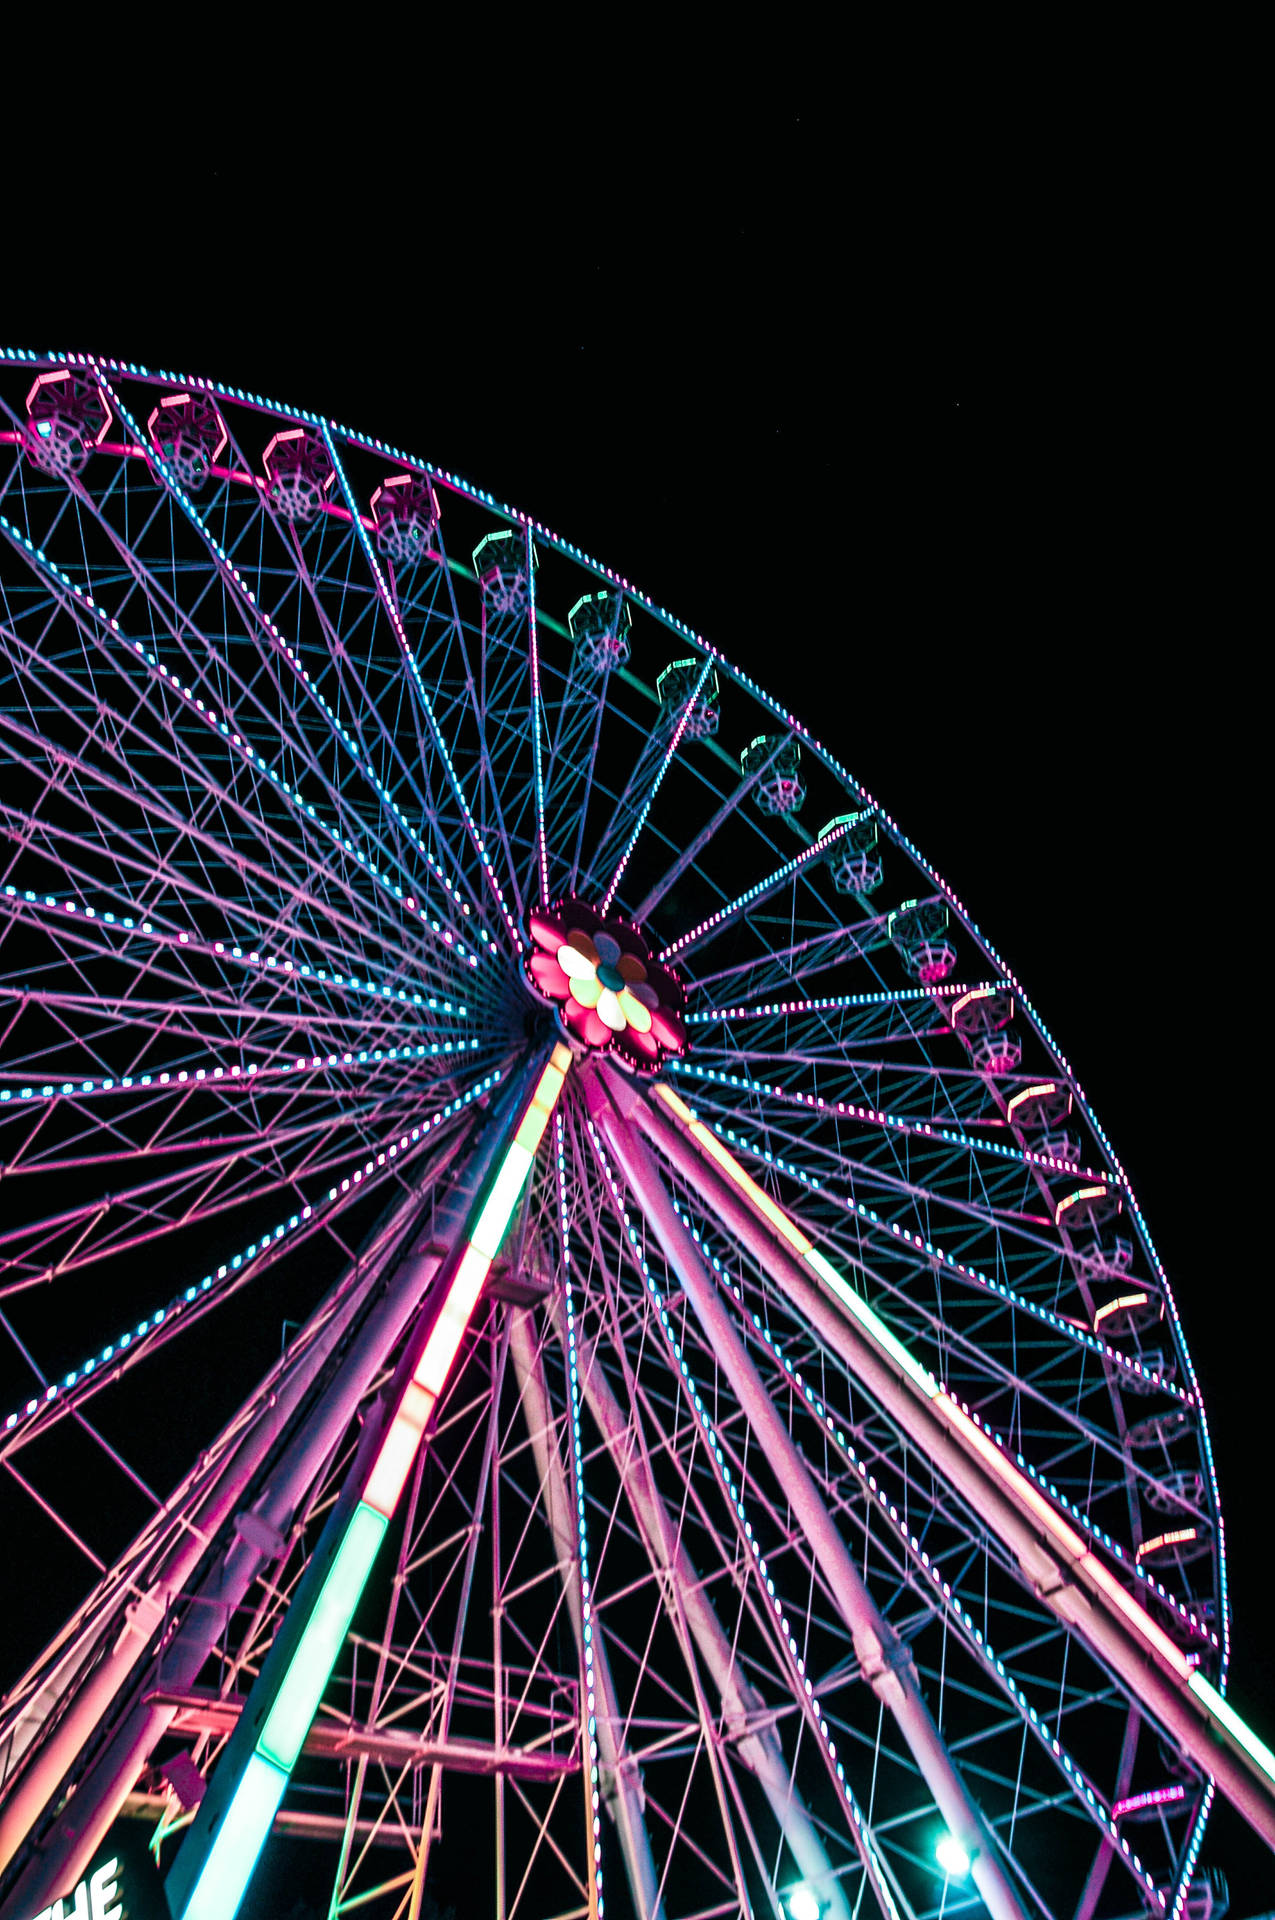 Ferriswheel Light Would Be Translated To 